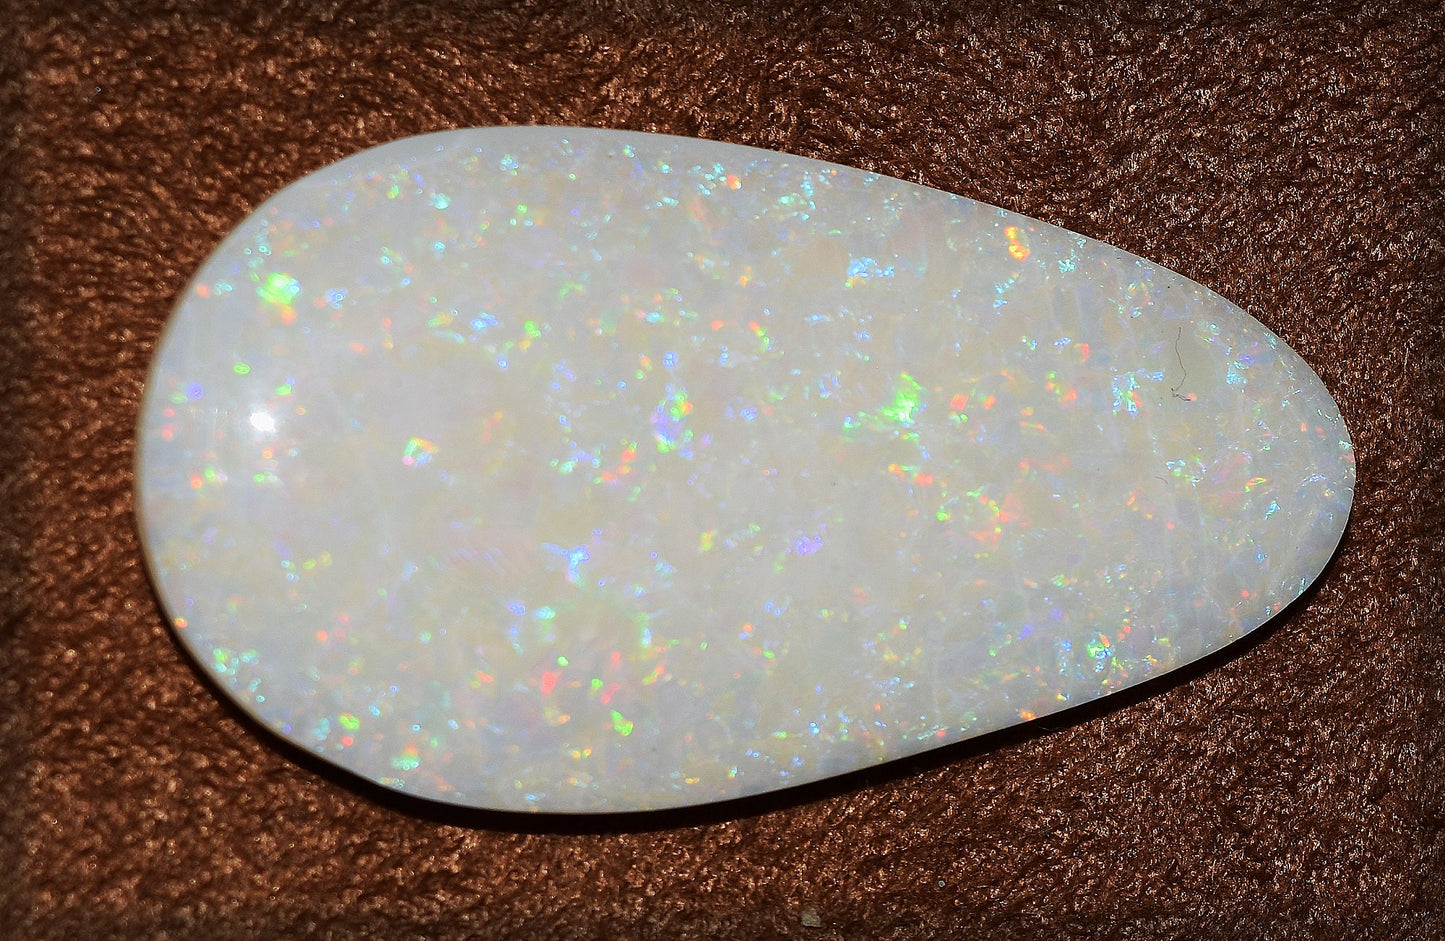 LOVE OPALS? Here is a MONSTER 39.28 carat gem with full, vibrant color - truly world class!